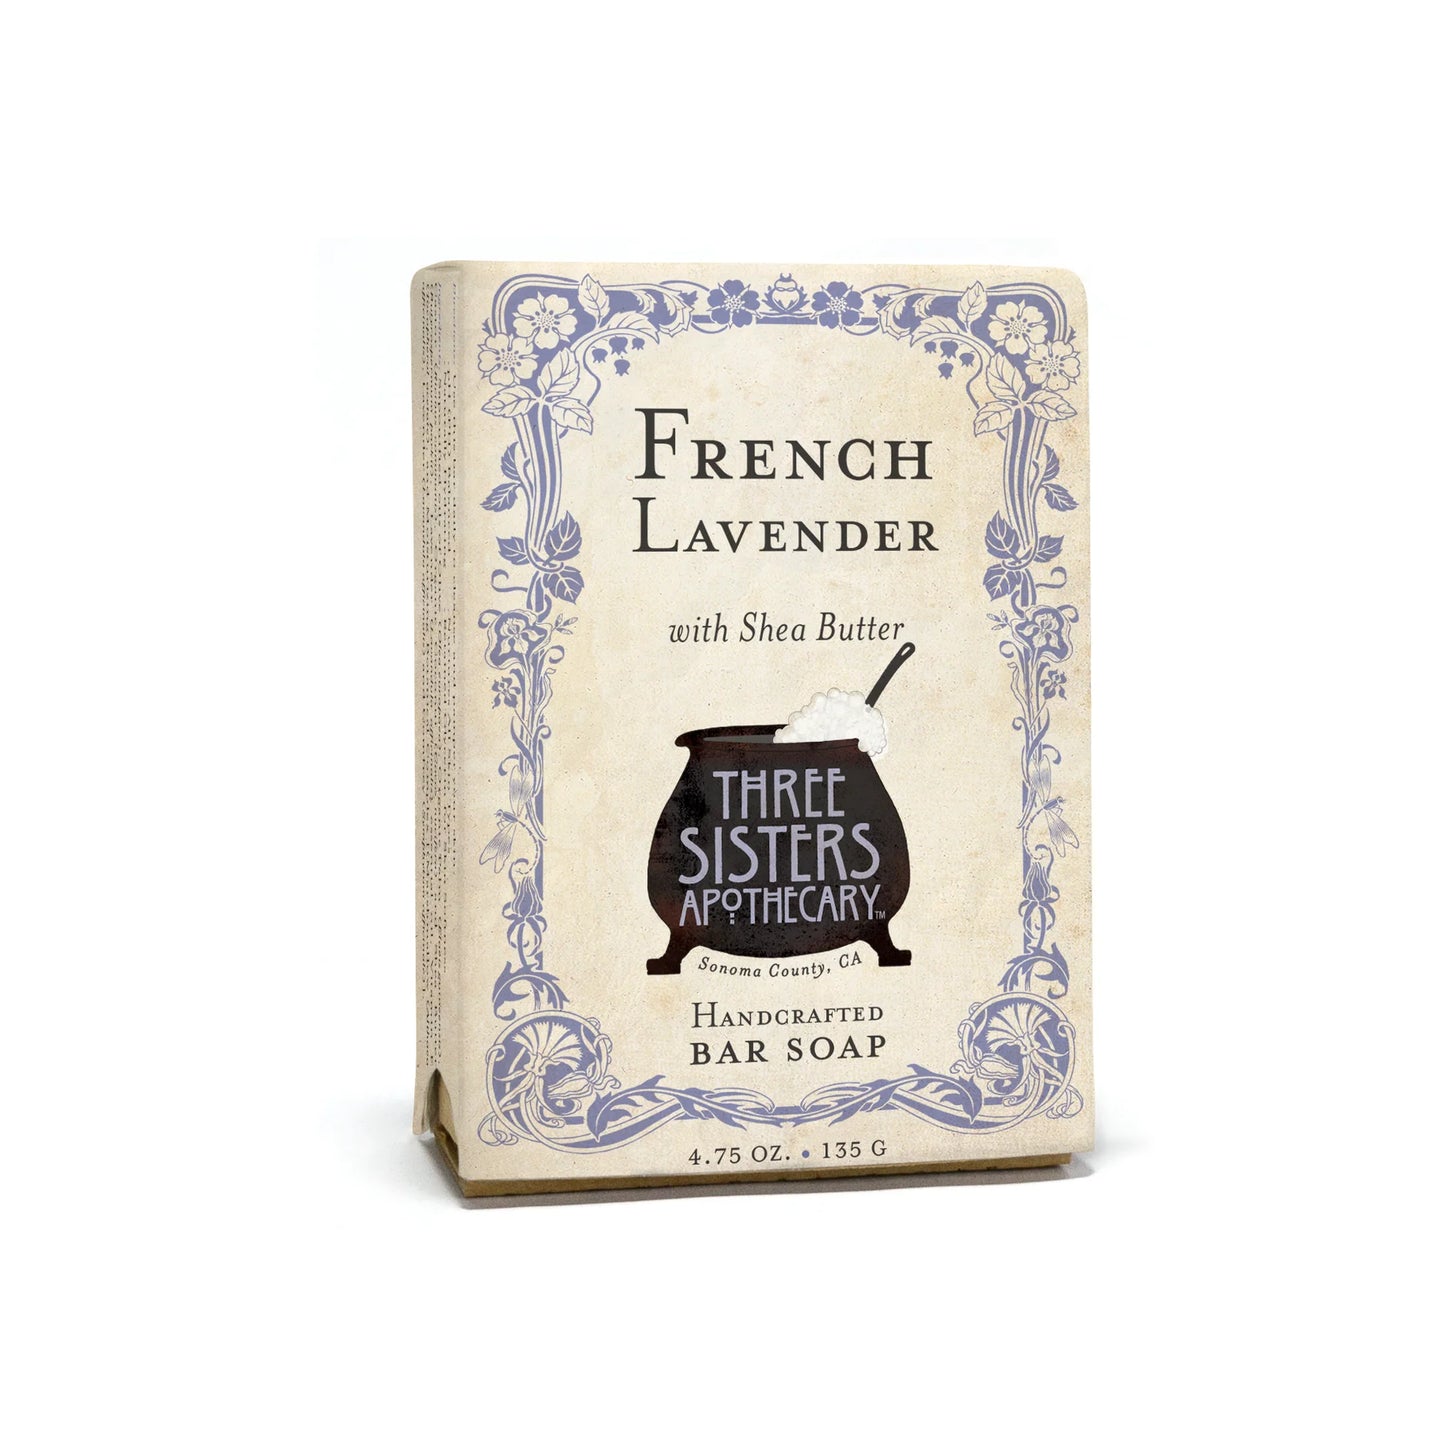 Three Sisters Apothecary - French Lavender Bar Soap